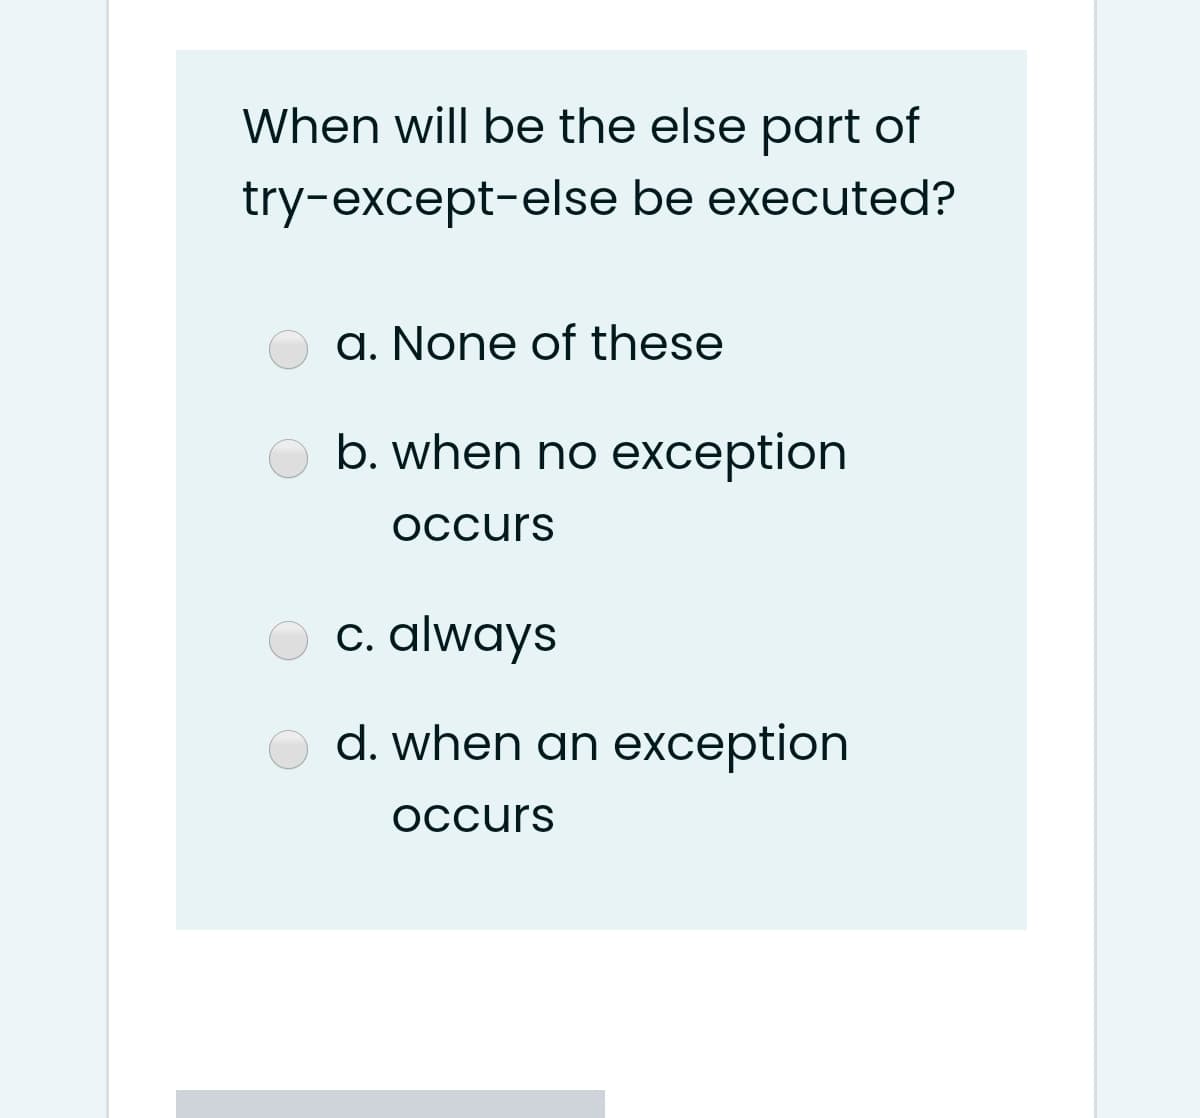 When will be the else part of
try-except-else be executed?
a. None of these
b. when no exception
occurs
c. always
d. when an exception
occurs
